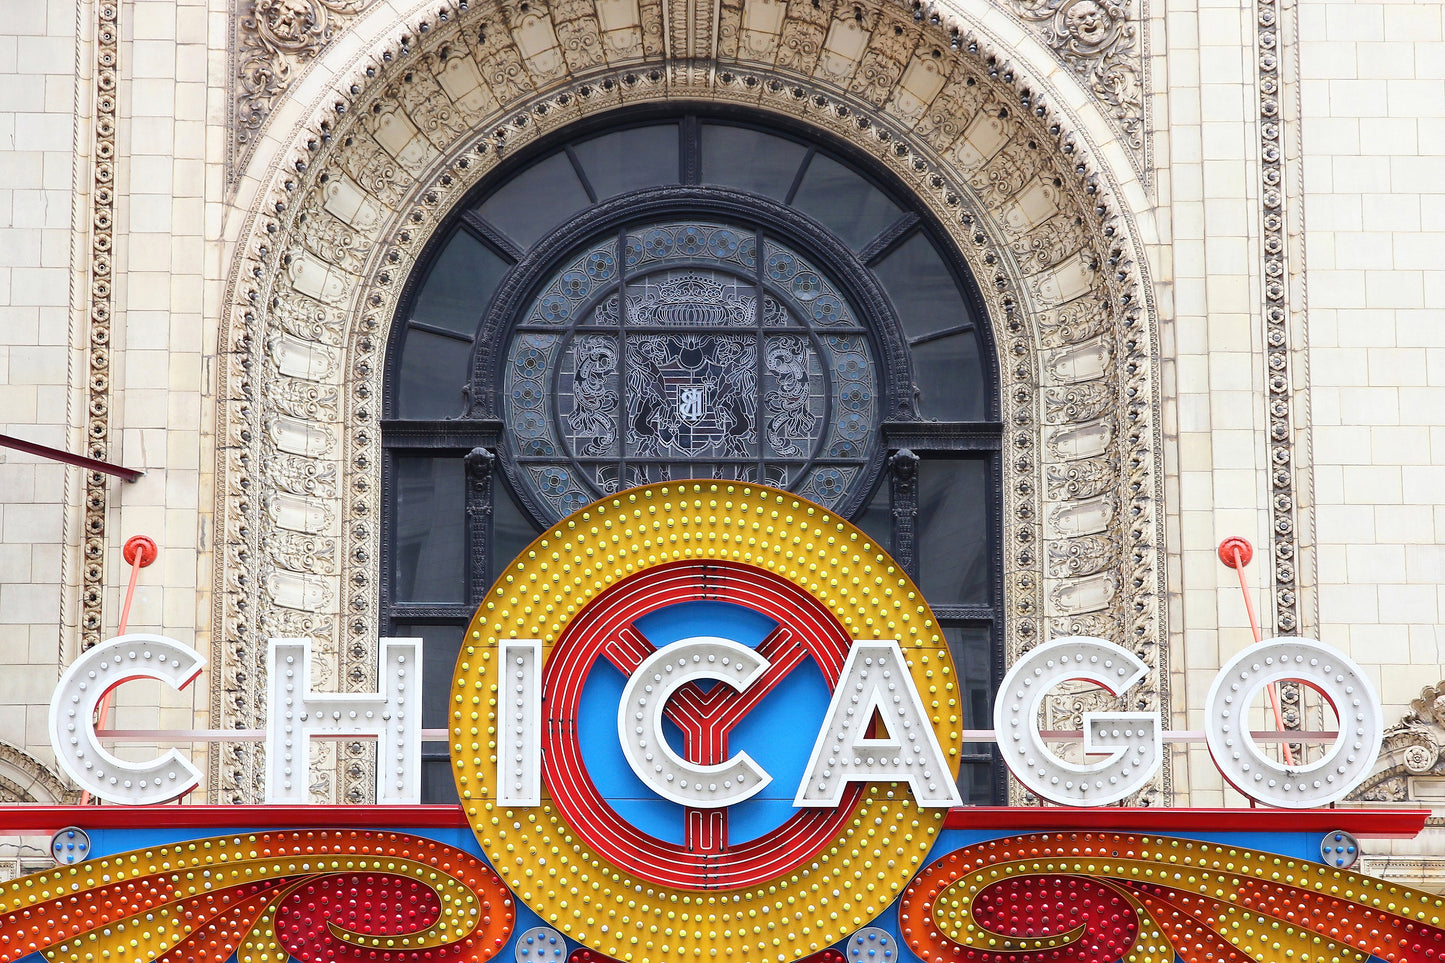 Chicago Theater wall art, Chicago architecture, neon sign in color, Chicago framed art, Chicago photo print, canvas decor, 5x7 to 32x48